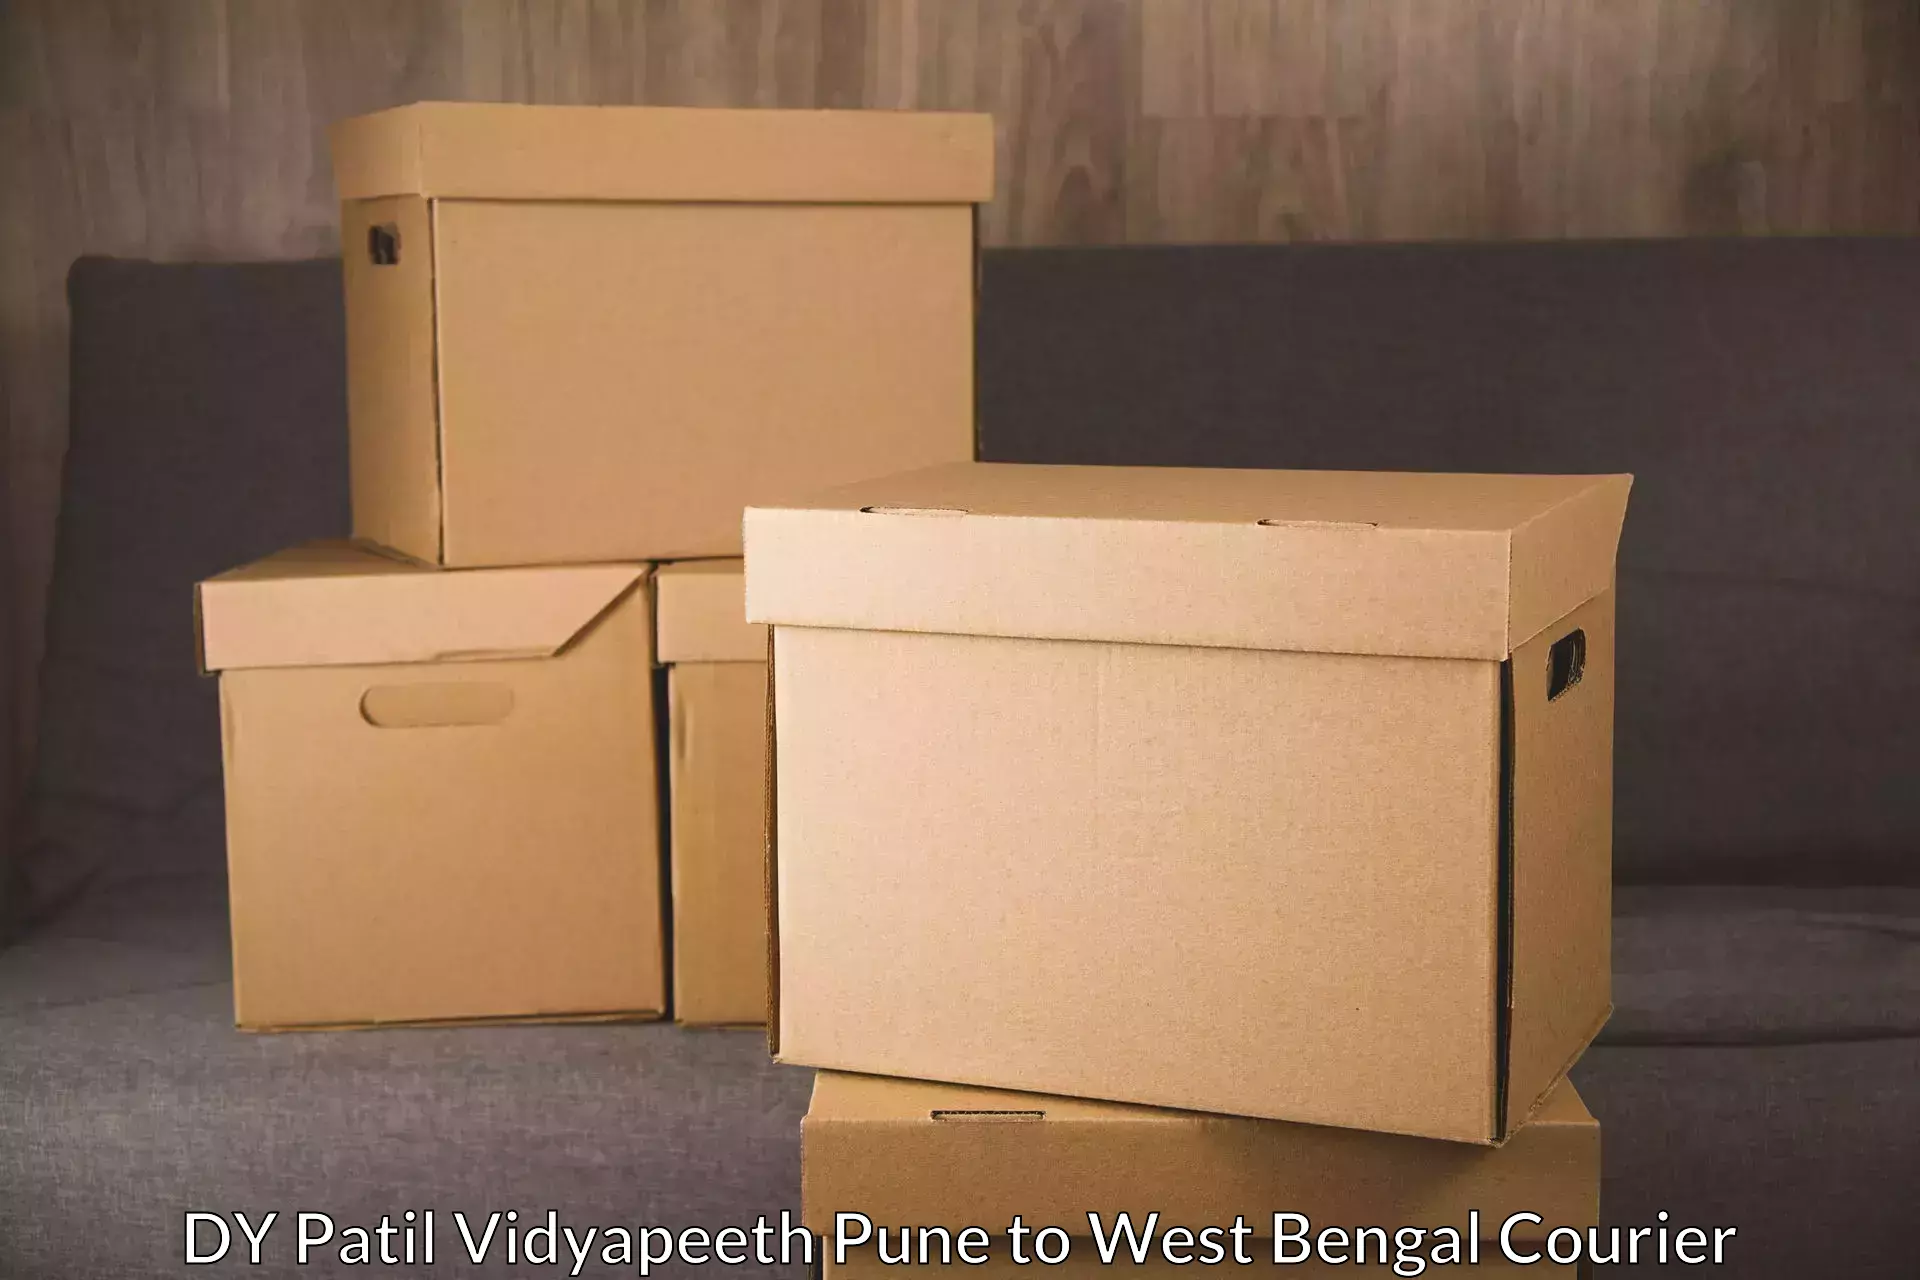 Nationwide shipping services DY Patil Vidyapeeth Pune to Kakdwip